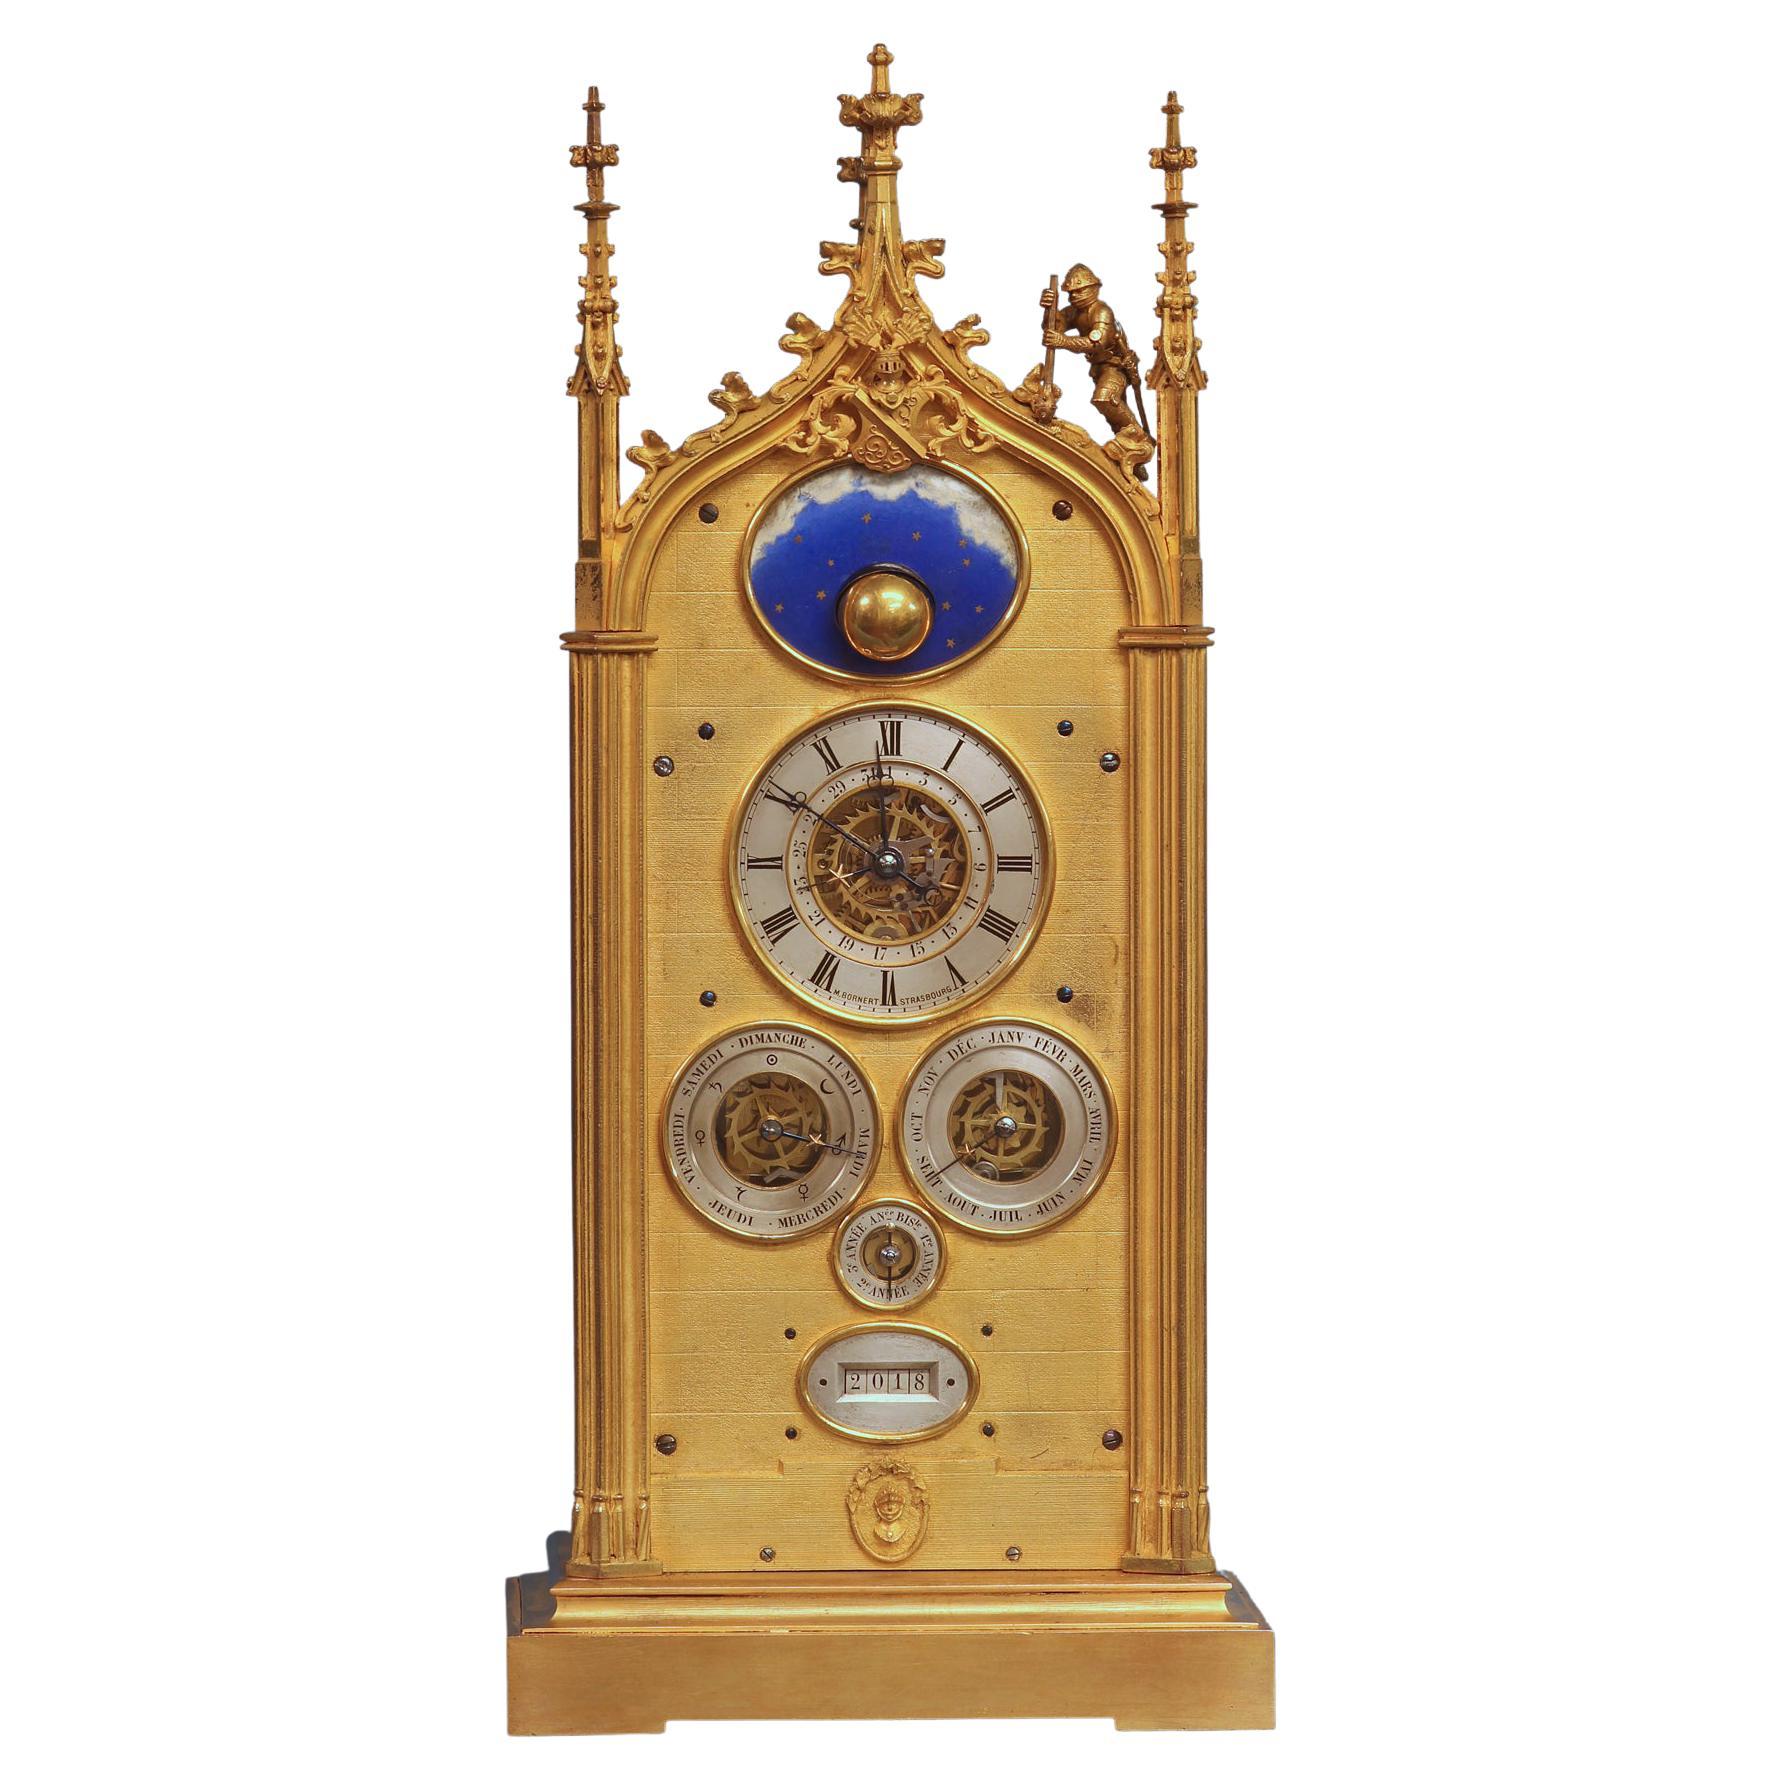 c.1850 French Multi-Dial Perpetual Calendar Mantle Clock with Rotating Moon